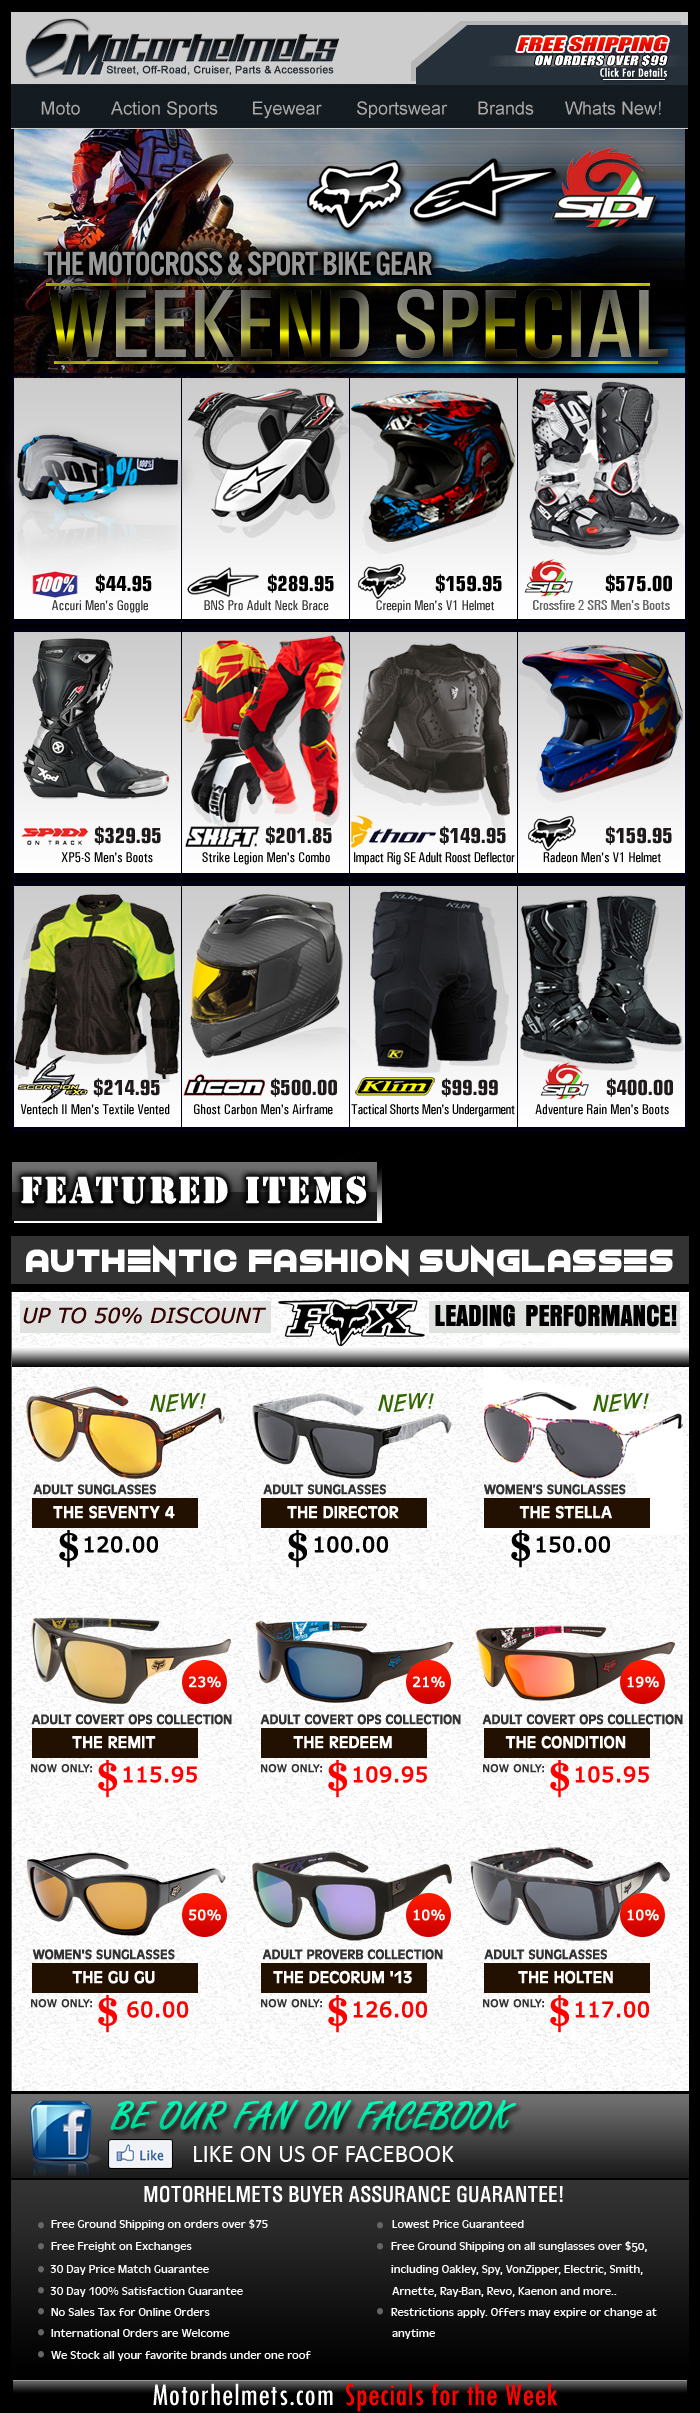 Weekend Specials...Premium Gear Selection from FOX, A-Stars, Scorpion and more!